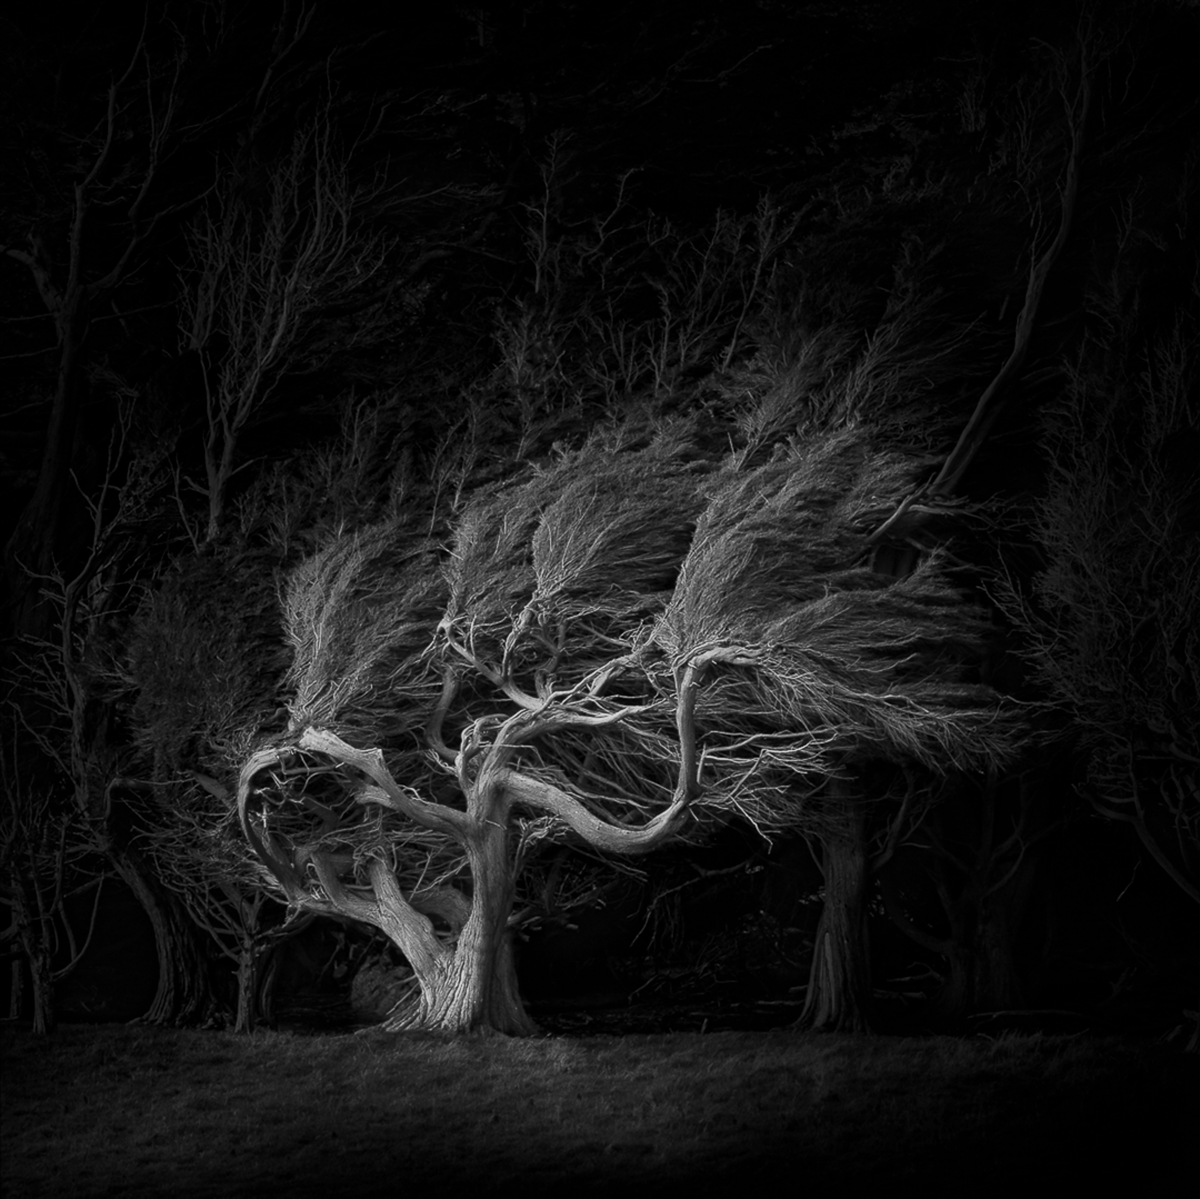 2022 Open Monochrome Section "Ghost Tree" by Neville Thorogood: Awarded APS Gold Medal